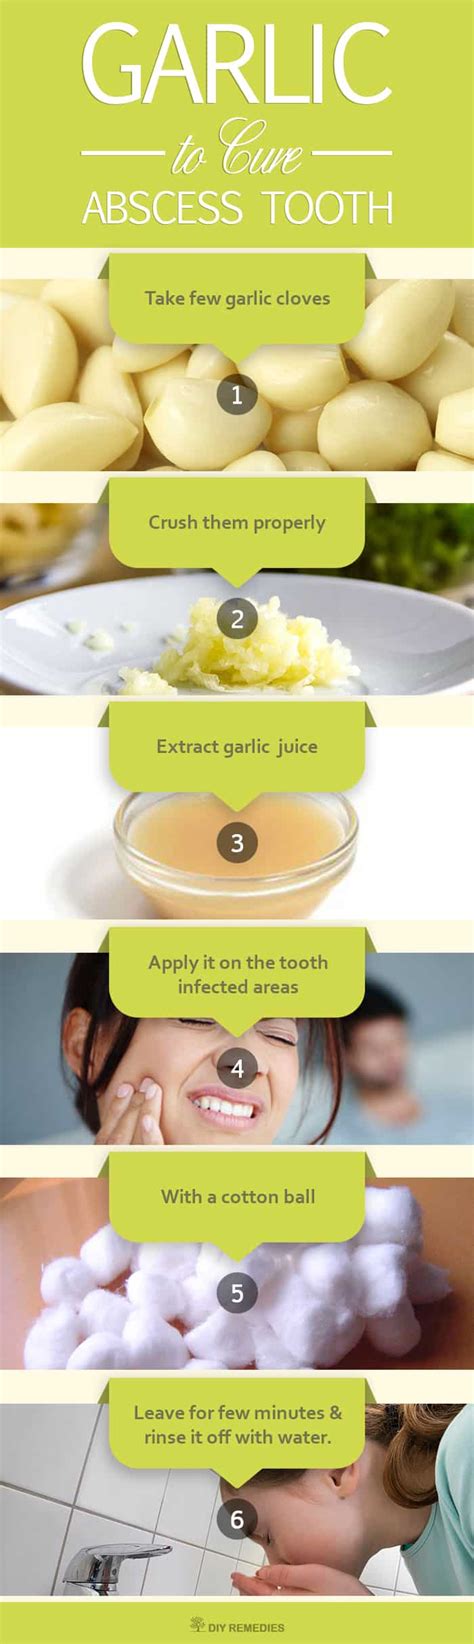 Natural Remedies To Cure Abscess Tooth